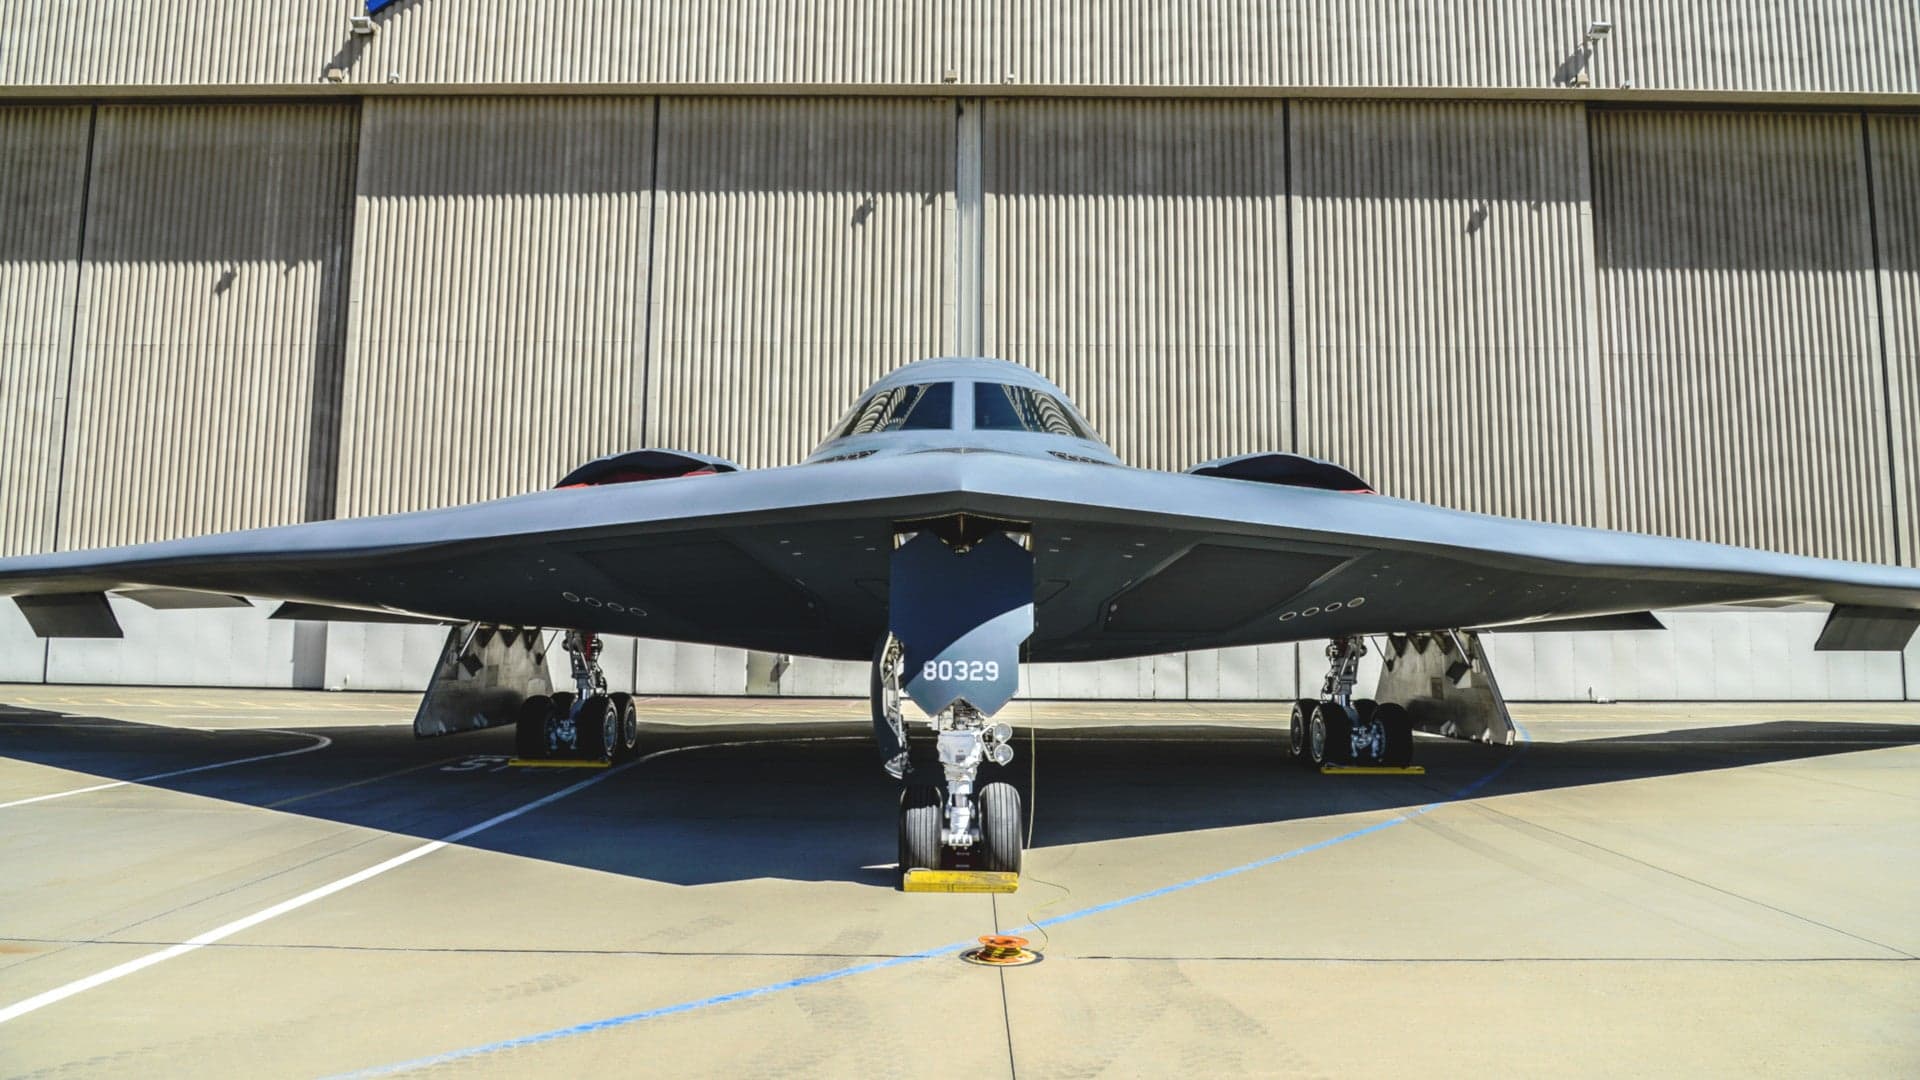 The B-2 Bomber Is Still Getting “Game-Changing” Upgrades As Focus Shifts To The B-21